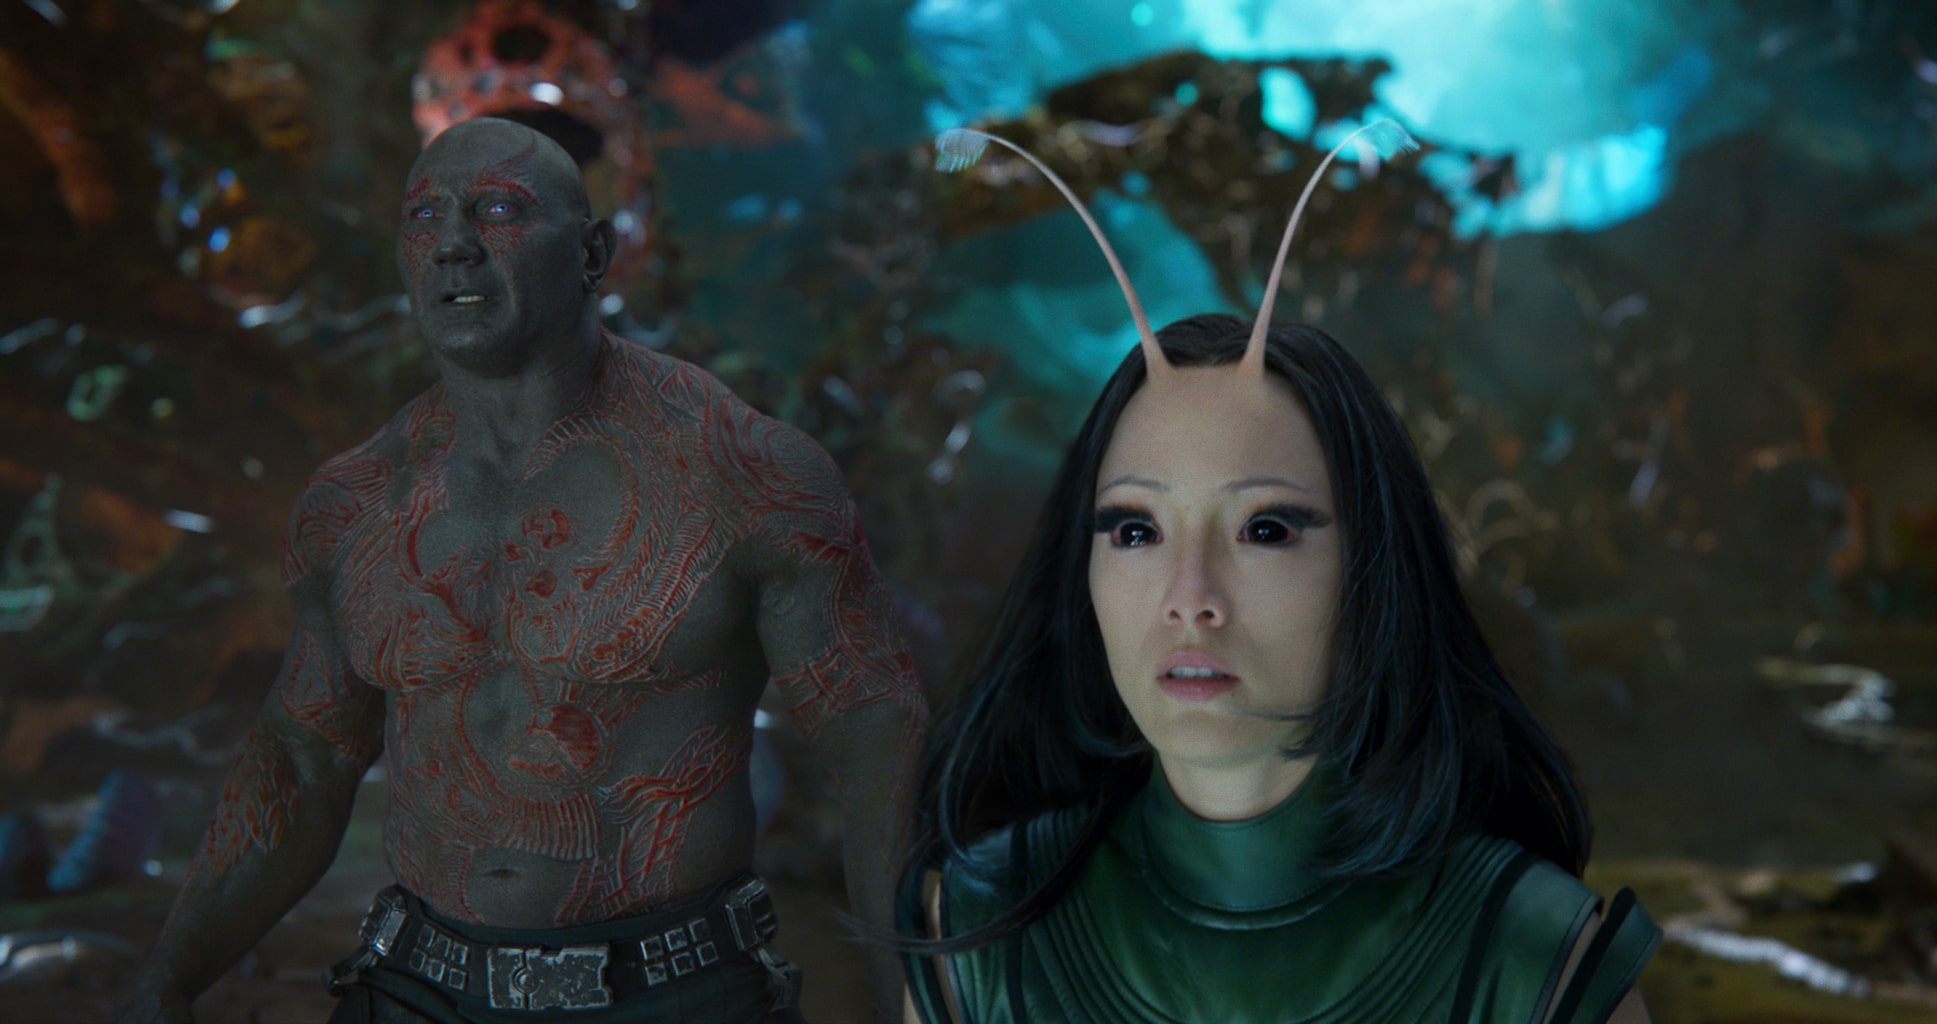 On Set and Behind the Scenes with Guardians of the Galaxy Vol 2